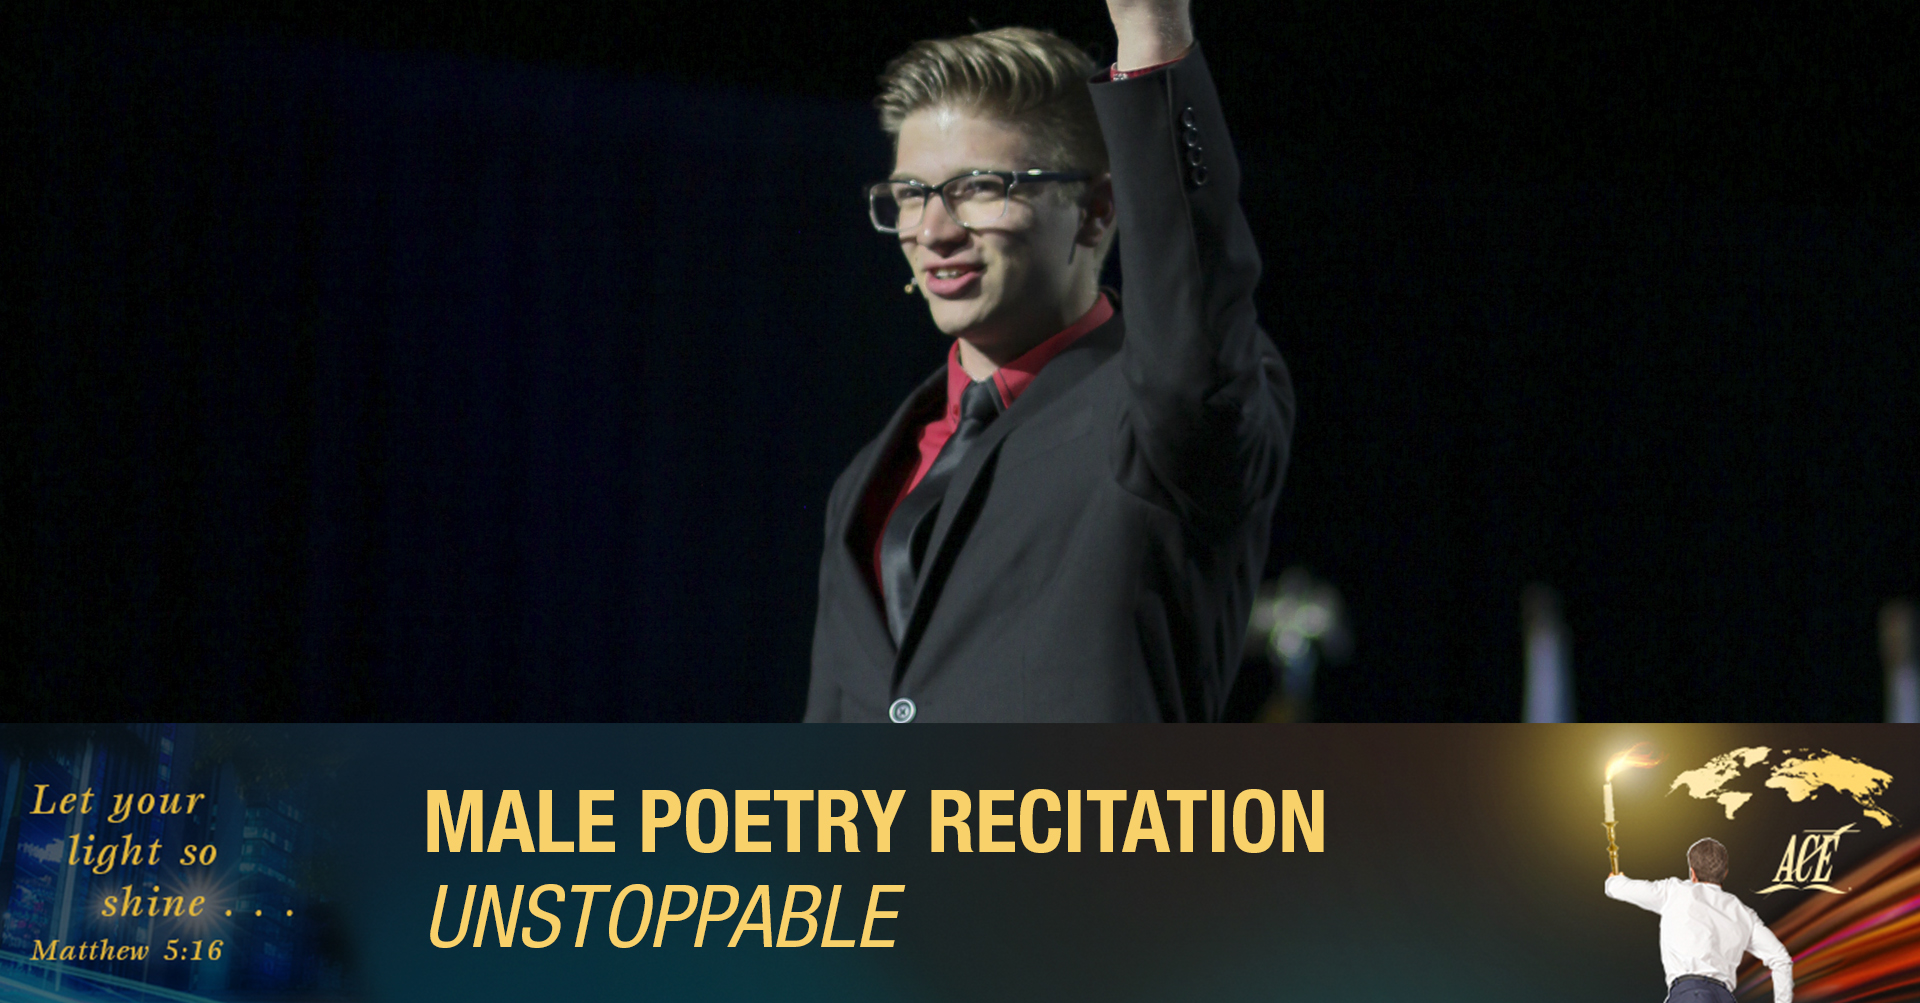 Male Poetry Recitation, "Unstoppable" - ISC 2019